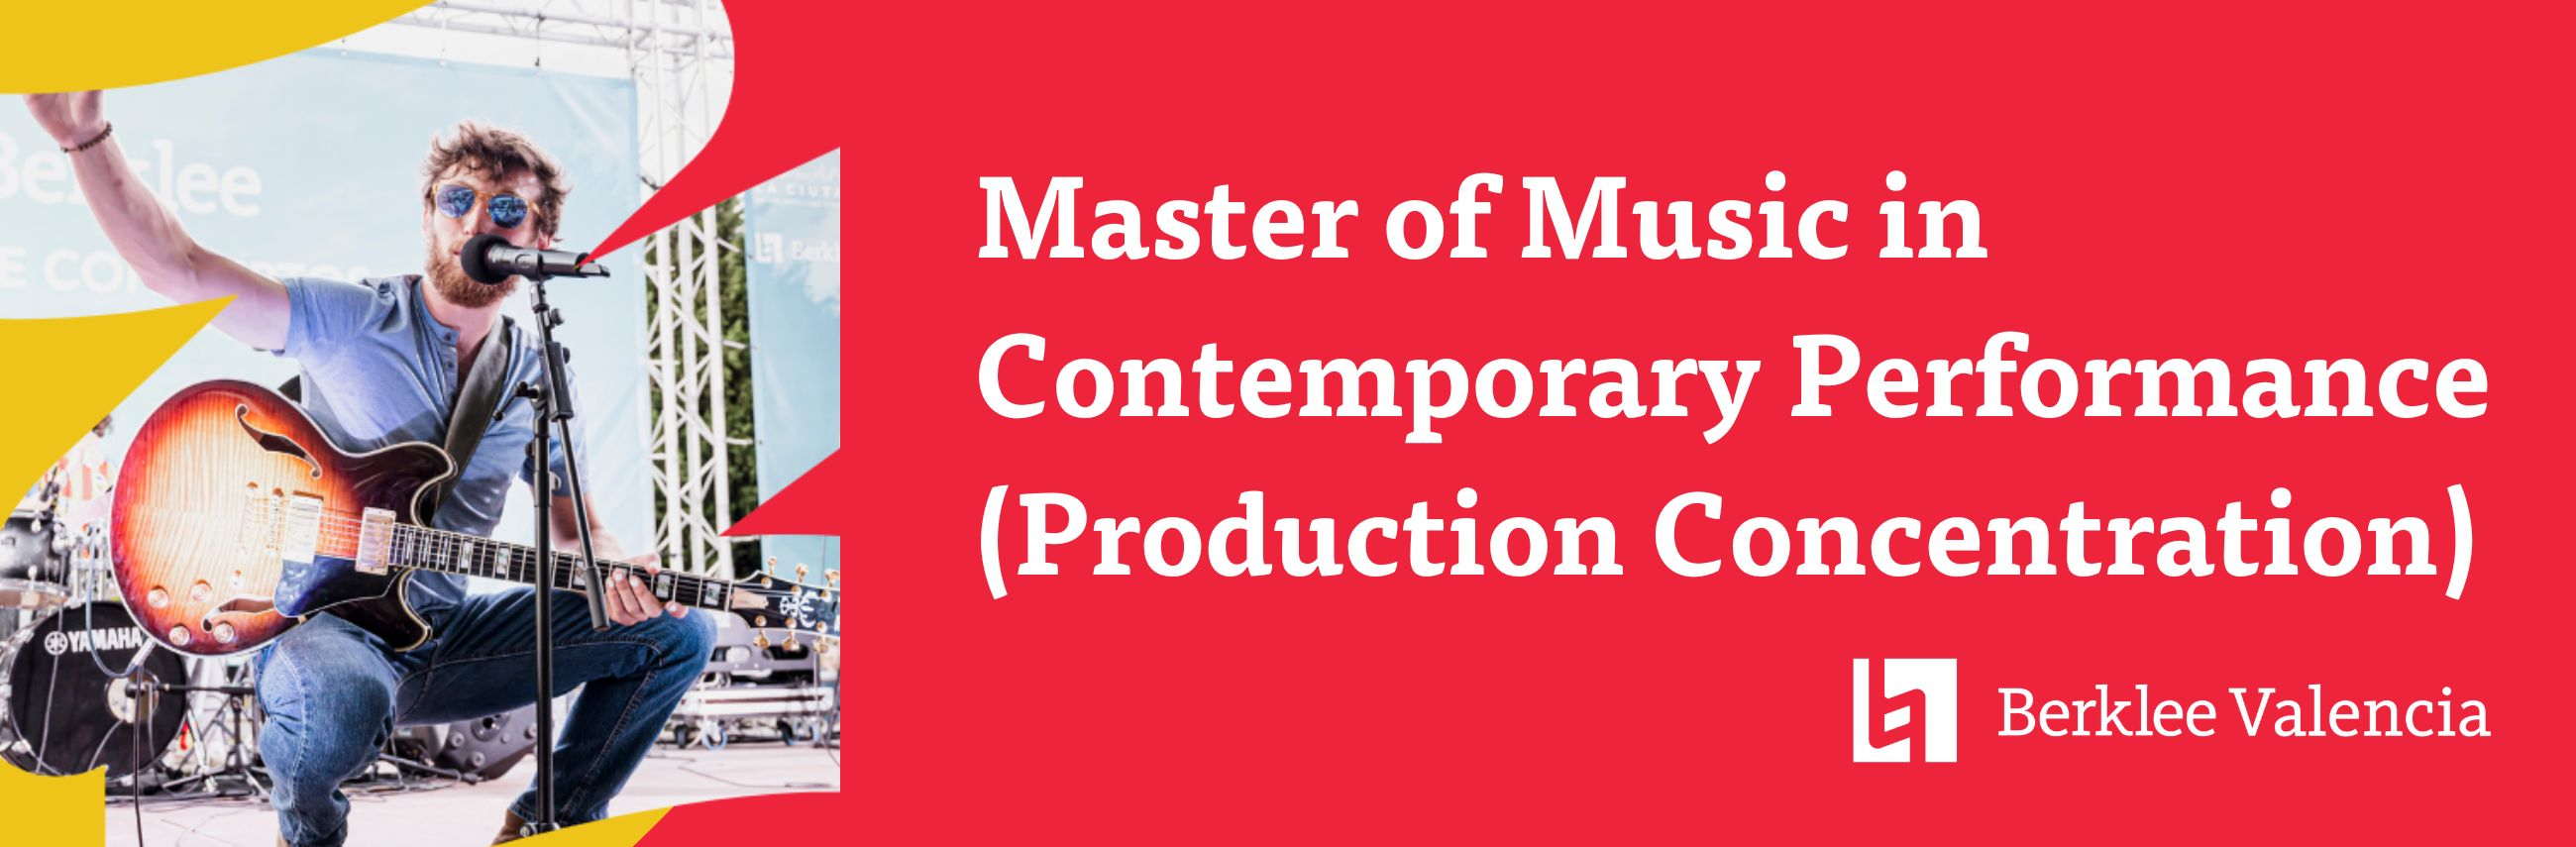 Master of Music in Contemporary Performance